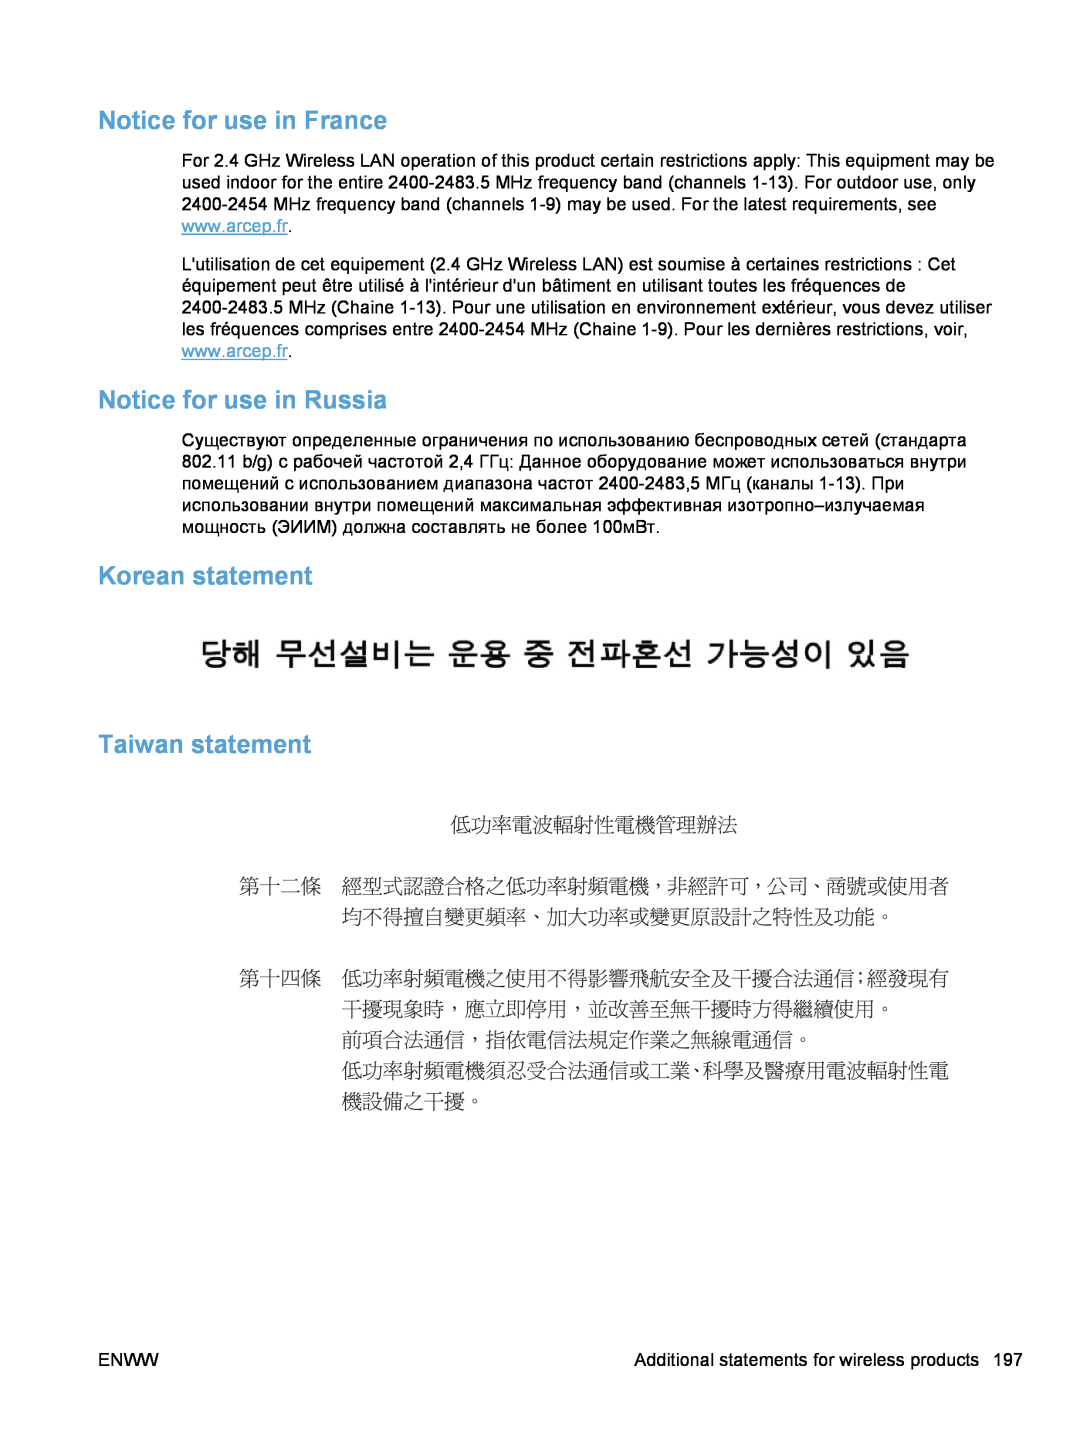 HP 100 COLOR MFP M175 manual Notice for use in France, Notice for use in Russia, Korean statement Taiwan statement 